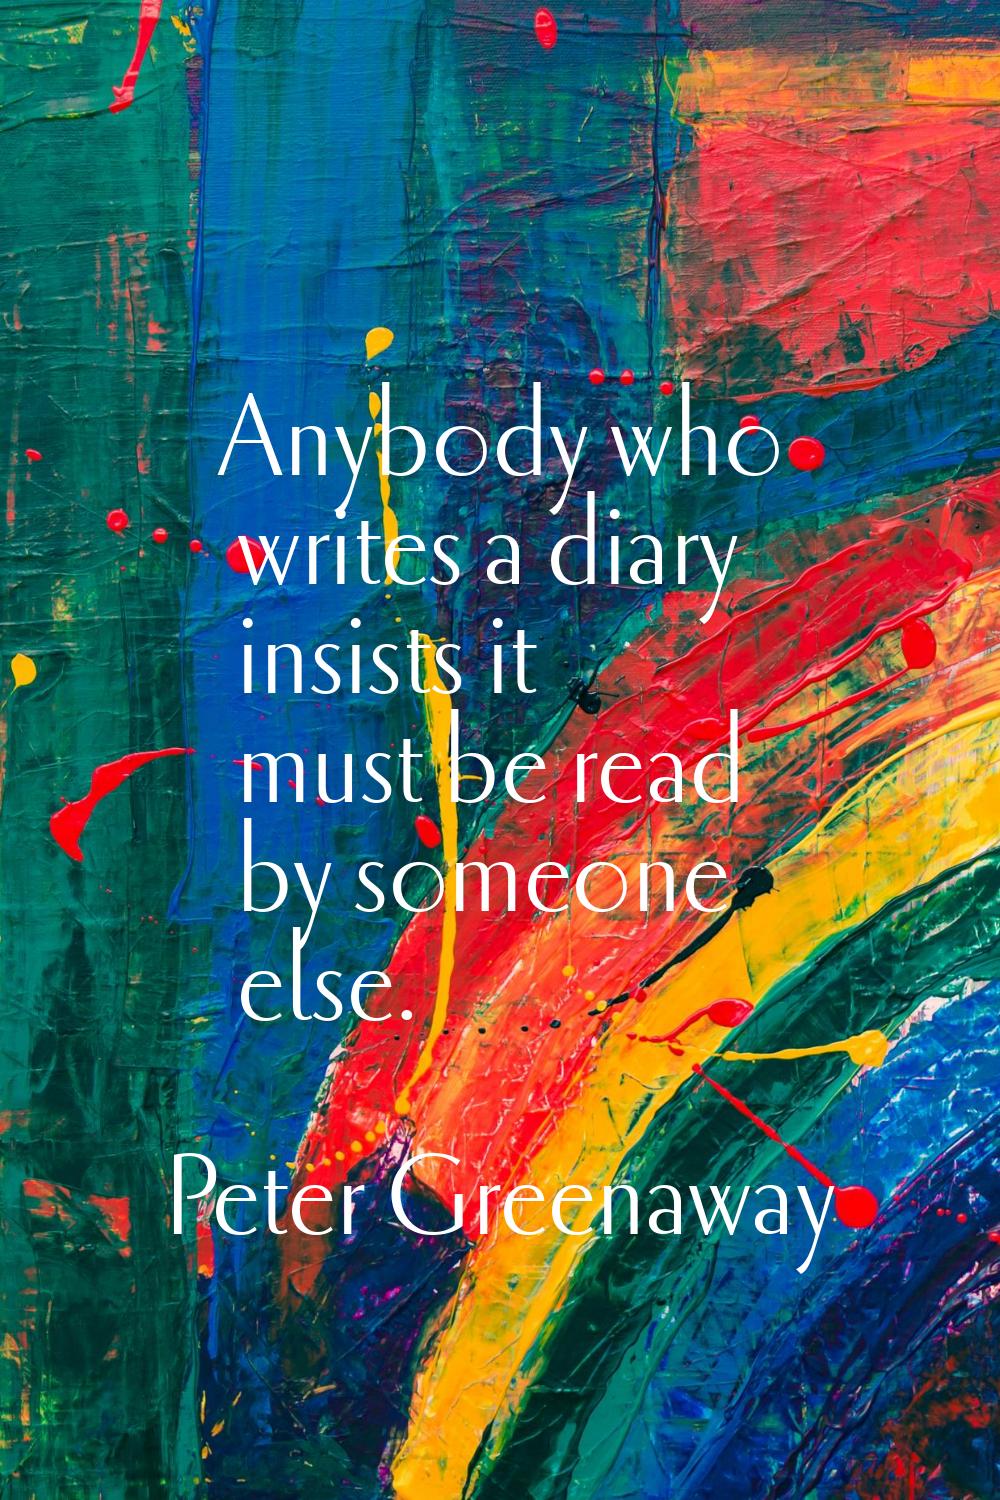 Anybody who writes a diary insists it must be read by someone else.